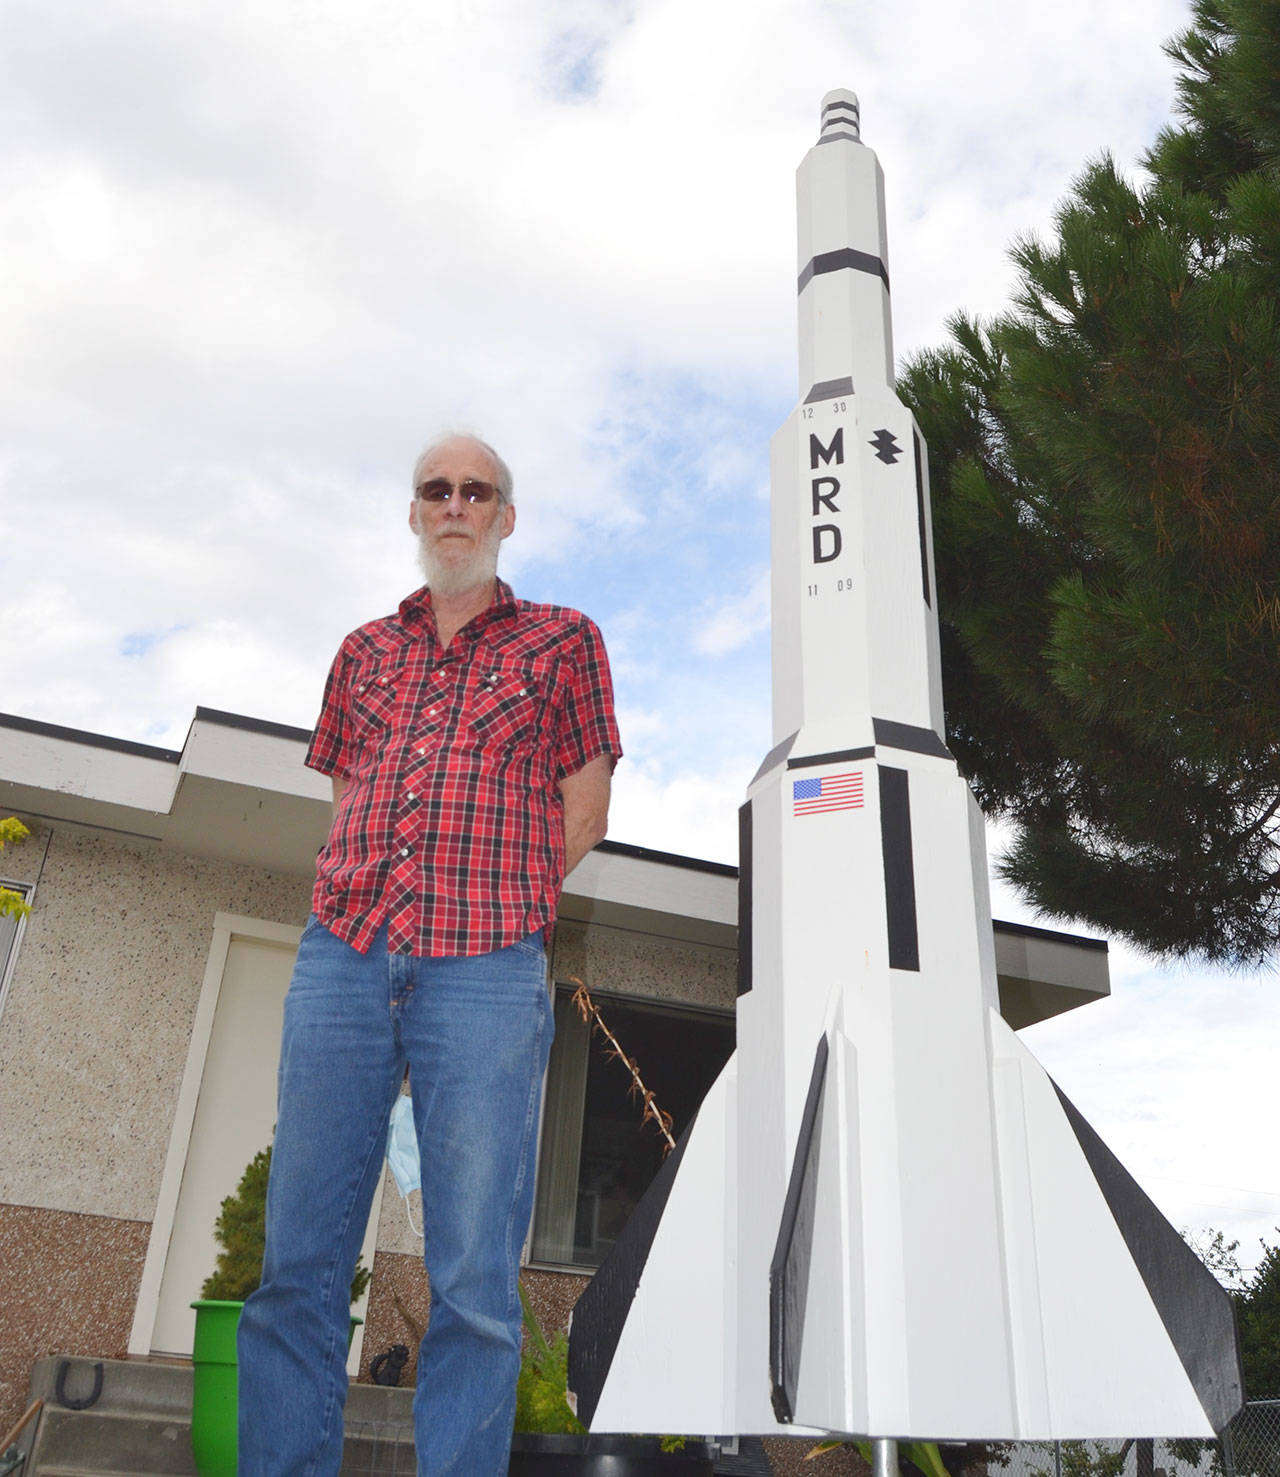 Sequim rocket man shares woodworking project on lawn